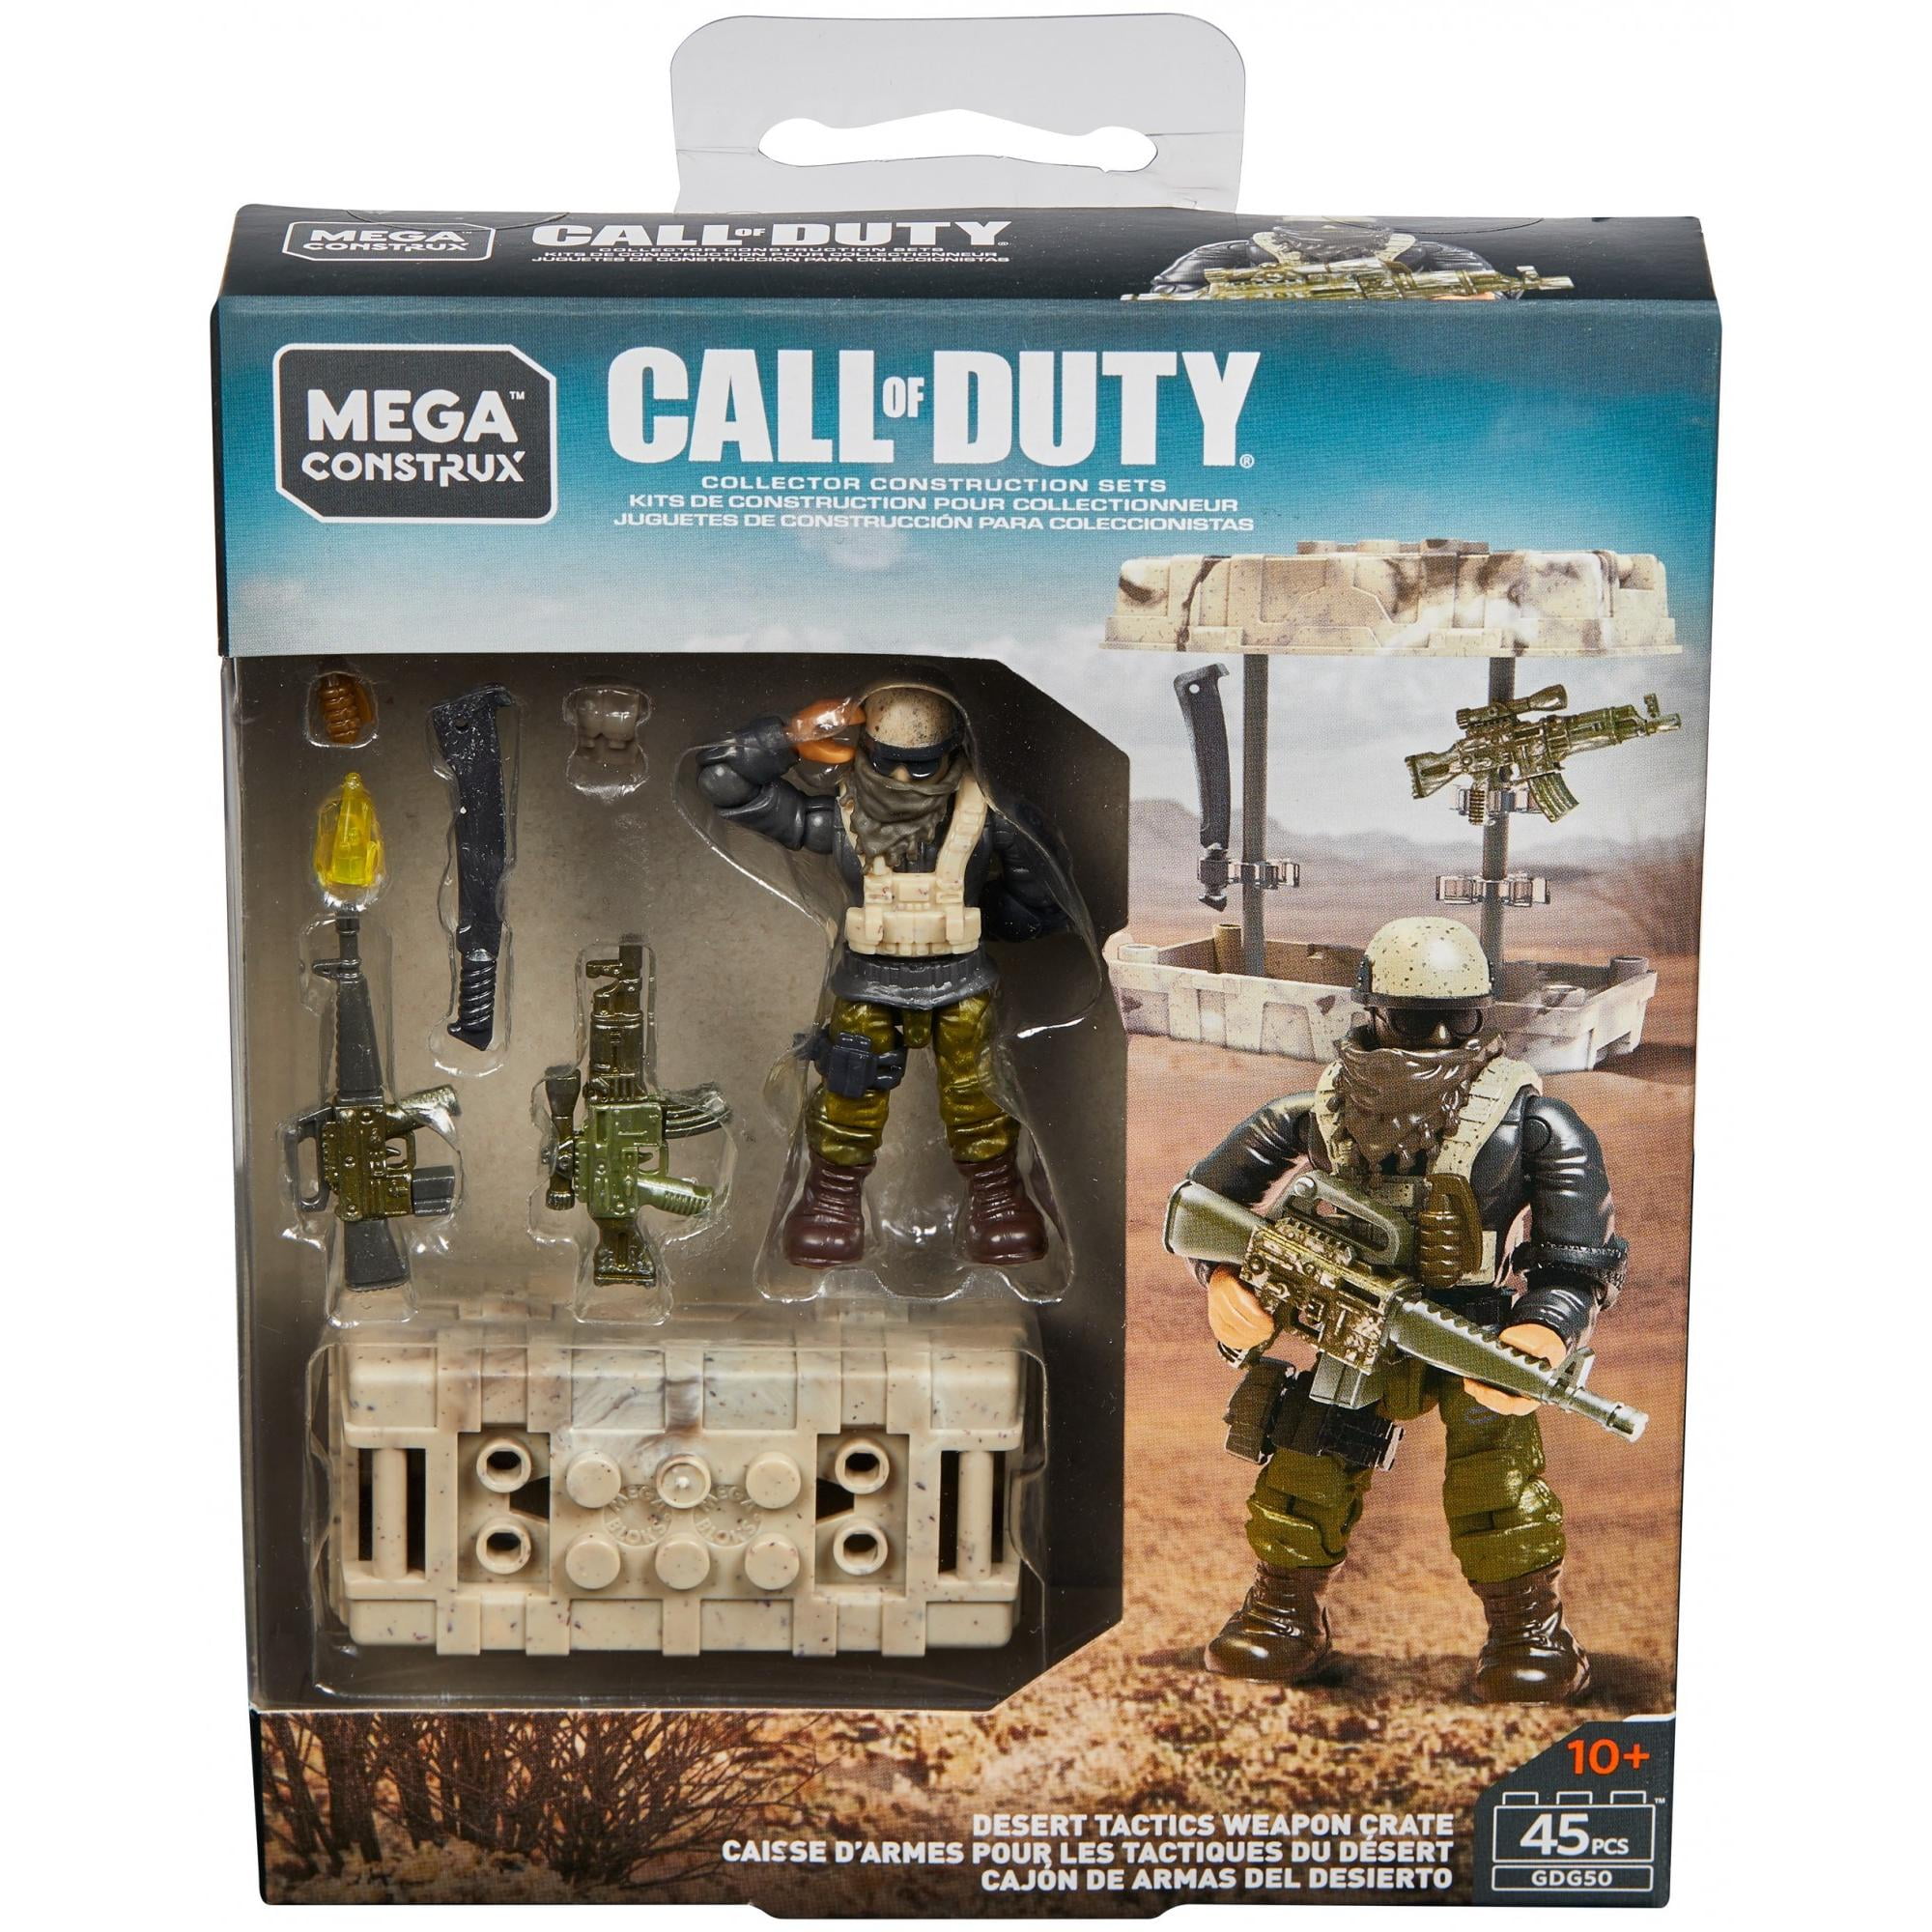 CALL OF DUTY NAVY WEAPON CRATE 39PCS GFW76 MEGA CONSTRUX  {09/3 